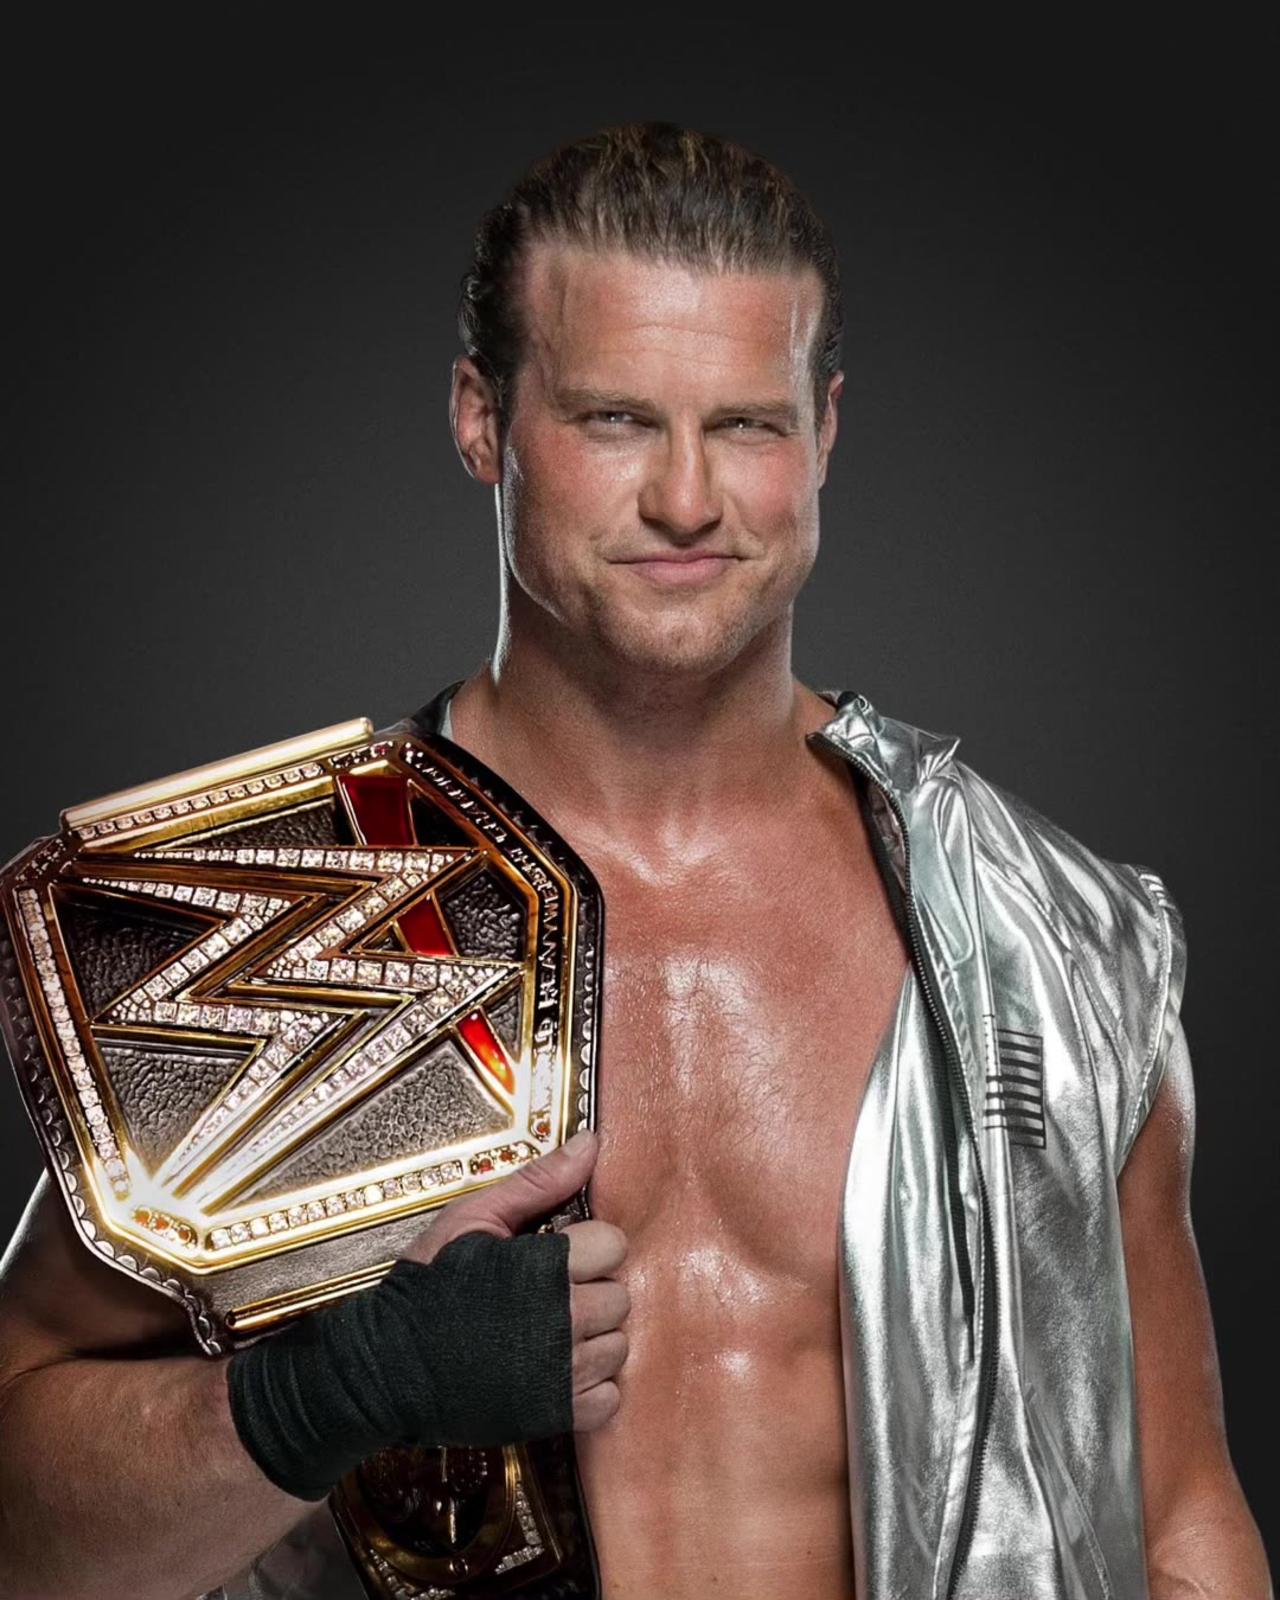 HOW TO MAKE DOLPH ZIGGLER A WORLD CHAMPION IN THE WWE